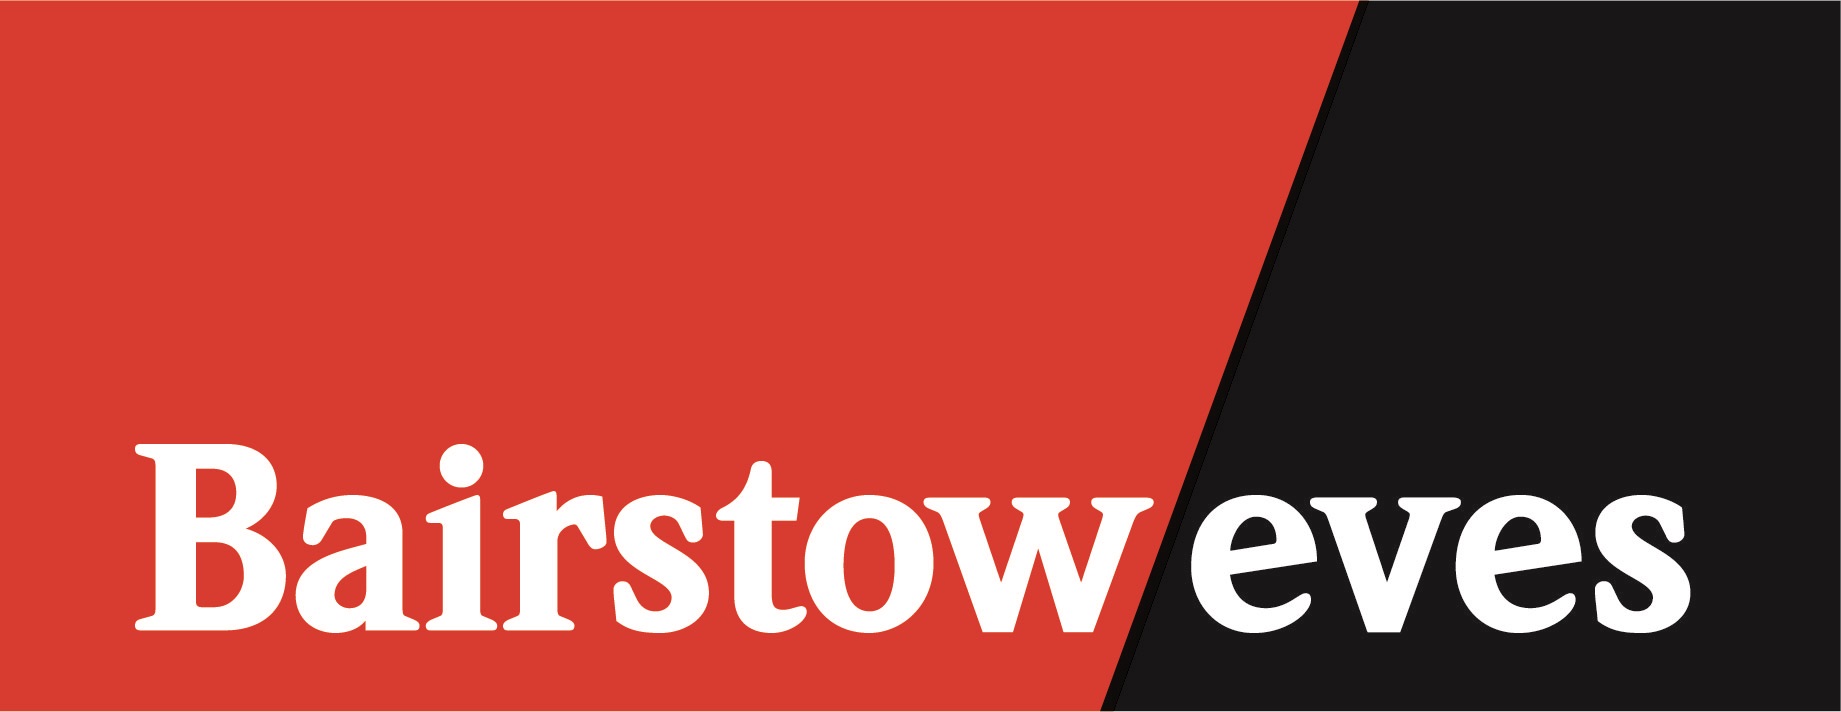 CW - Bairstow Eves - Walthamstow